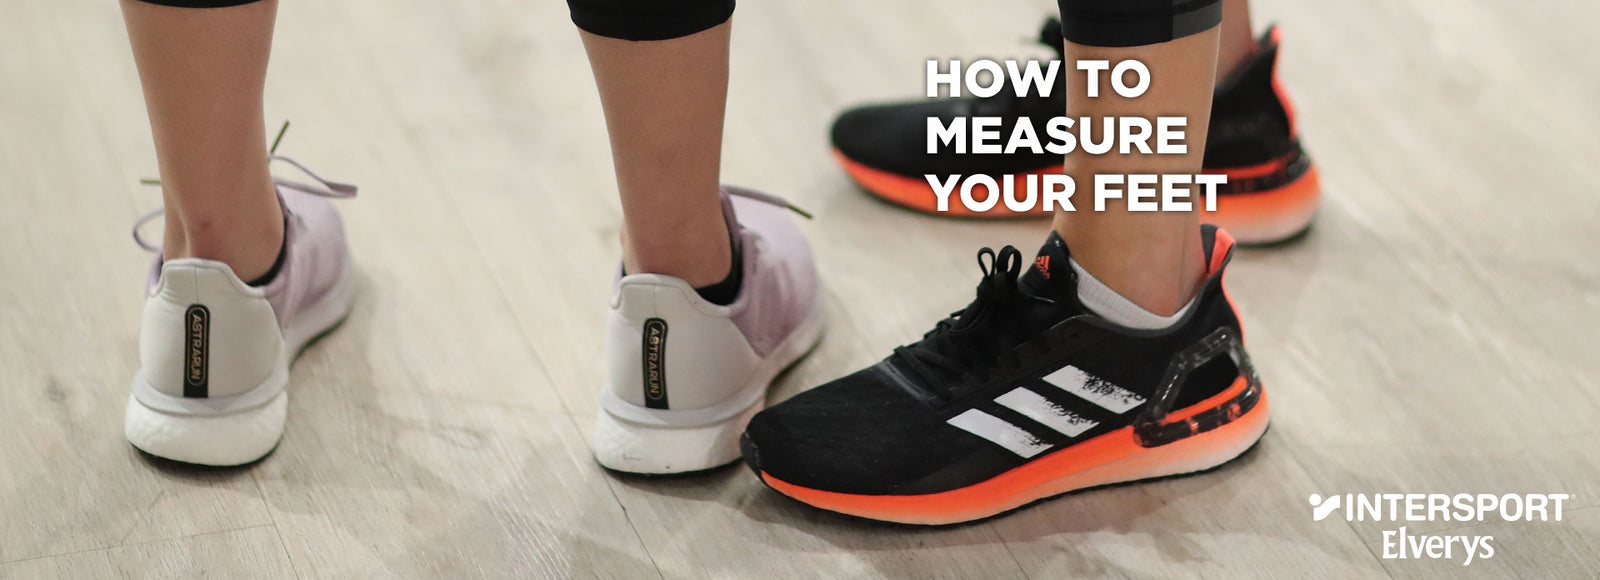 How To Measure Your Feet at Home